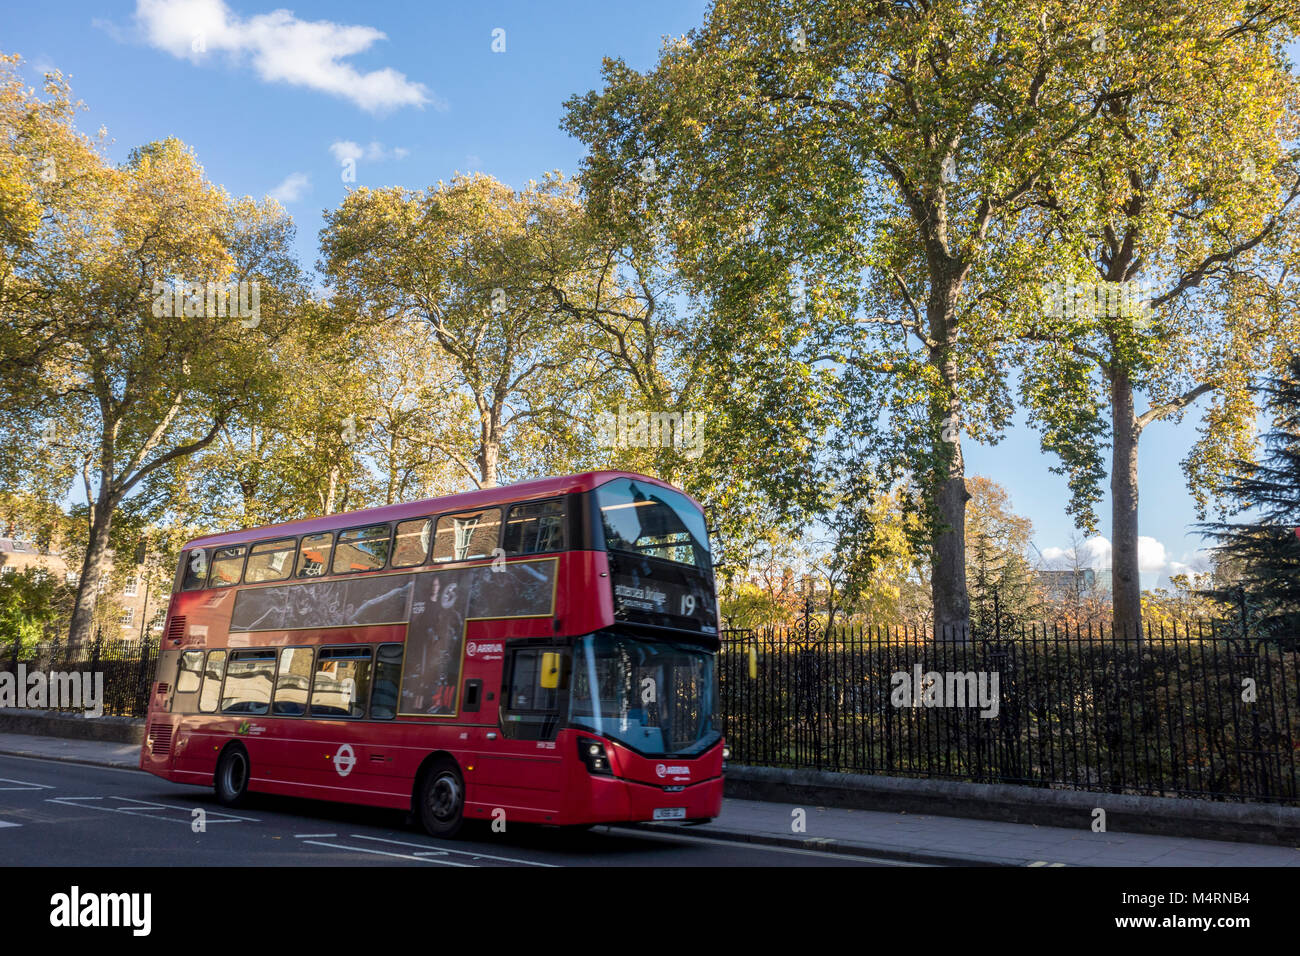 Red London bus on Theobalds Road in front of trees in Grays Inn Gardens, London, UK Stock Photo